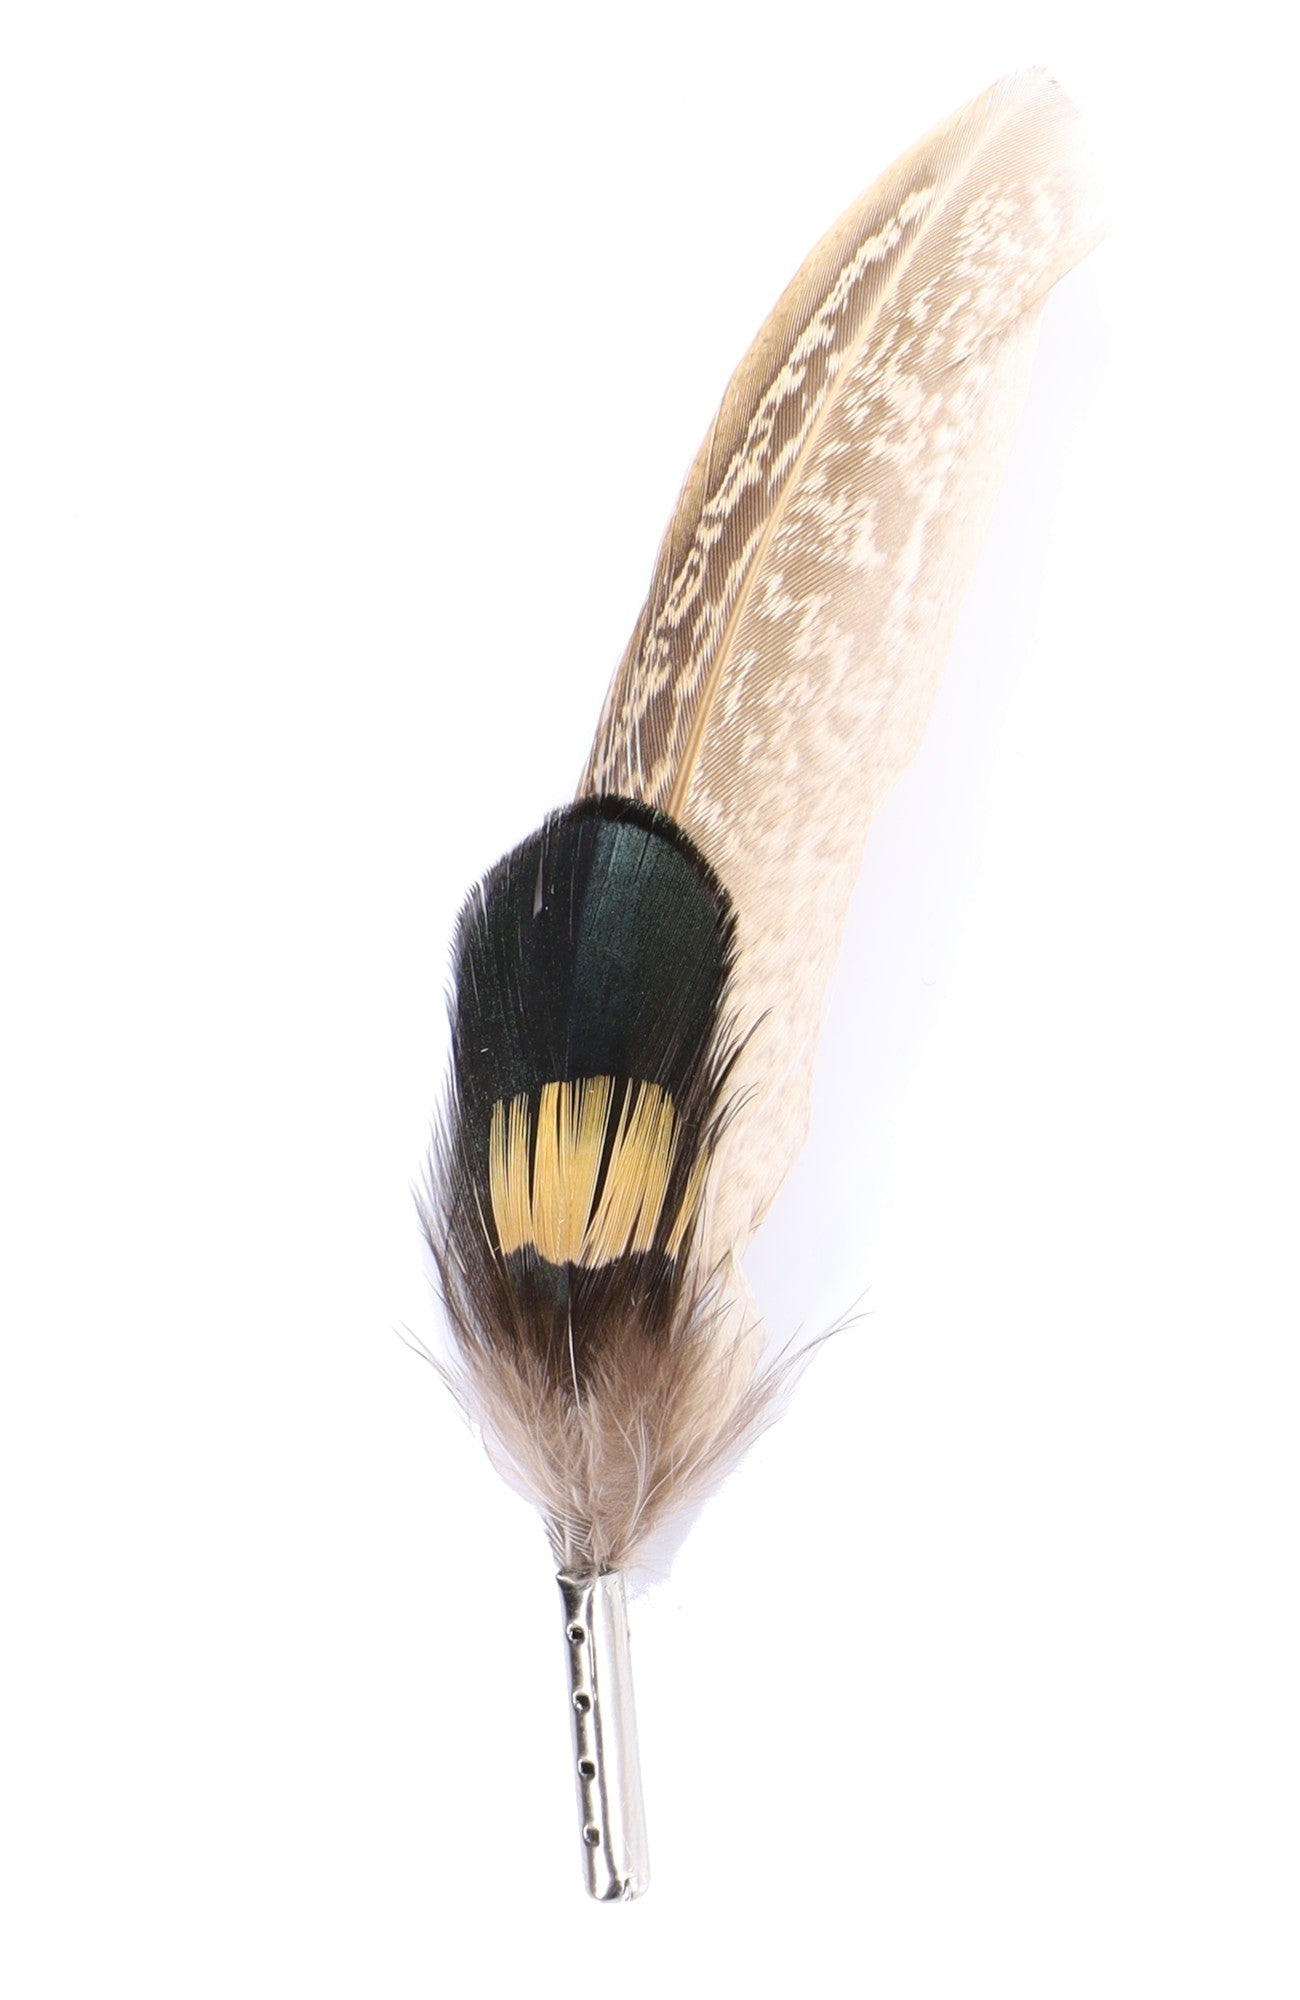 DapperFam Natural / Green / Yellow 4 in Iridescent Poultry Hat Feather in Silver Tip